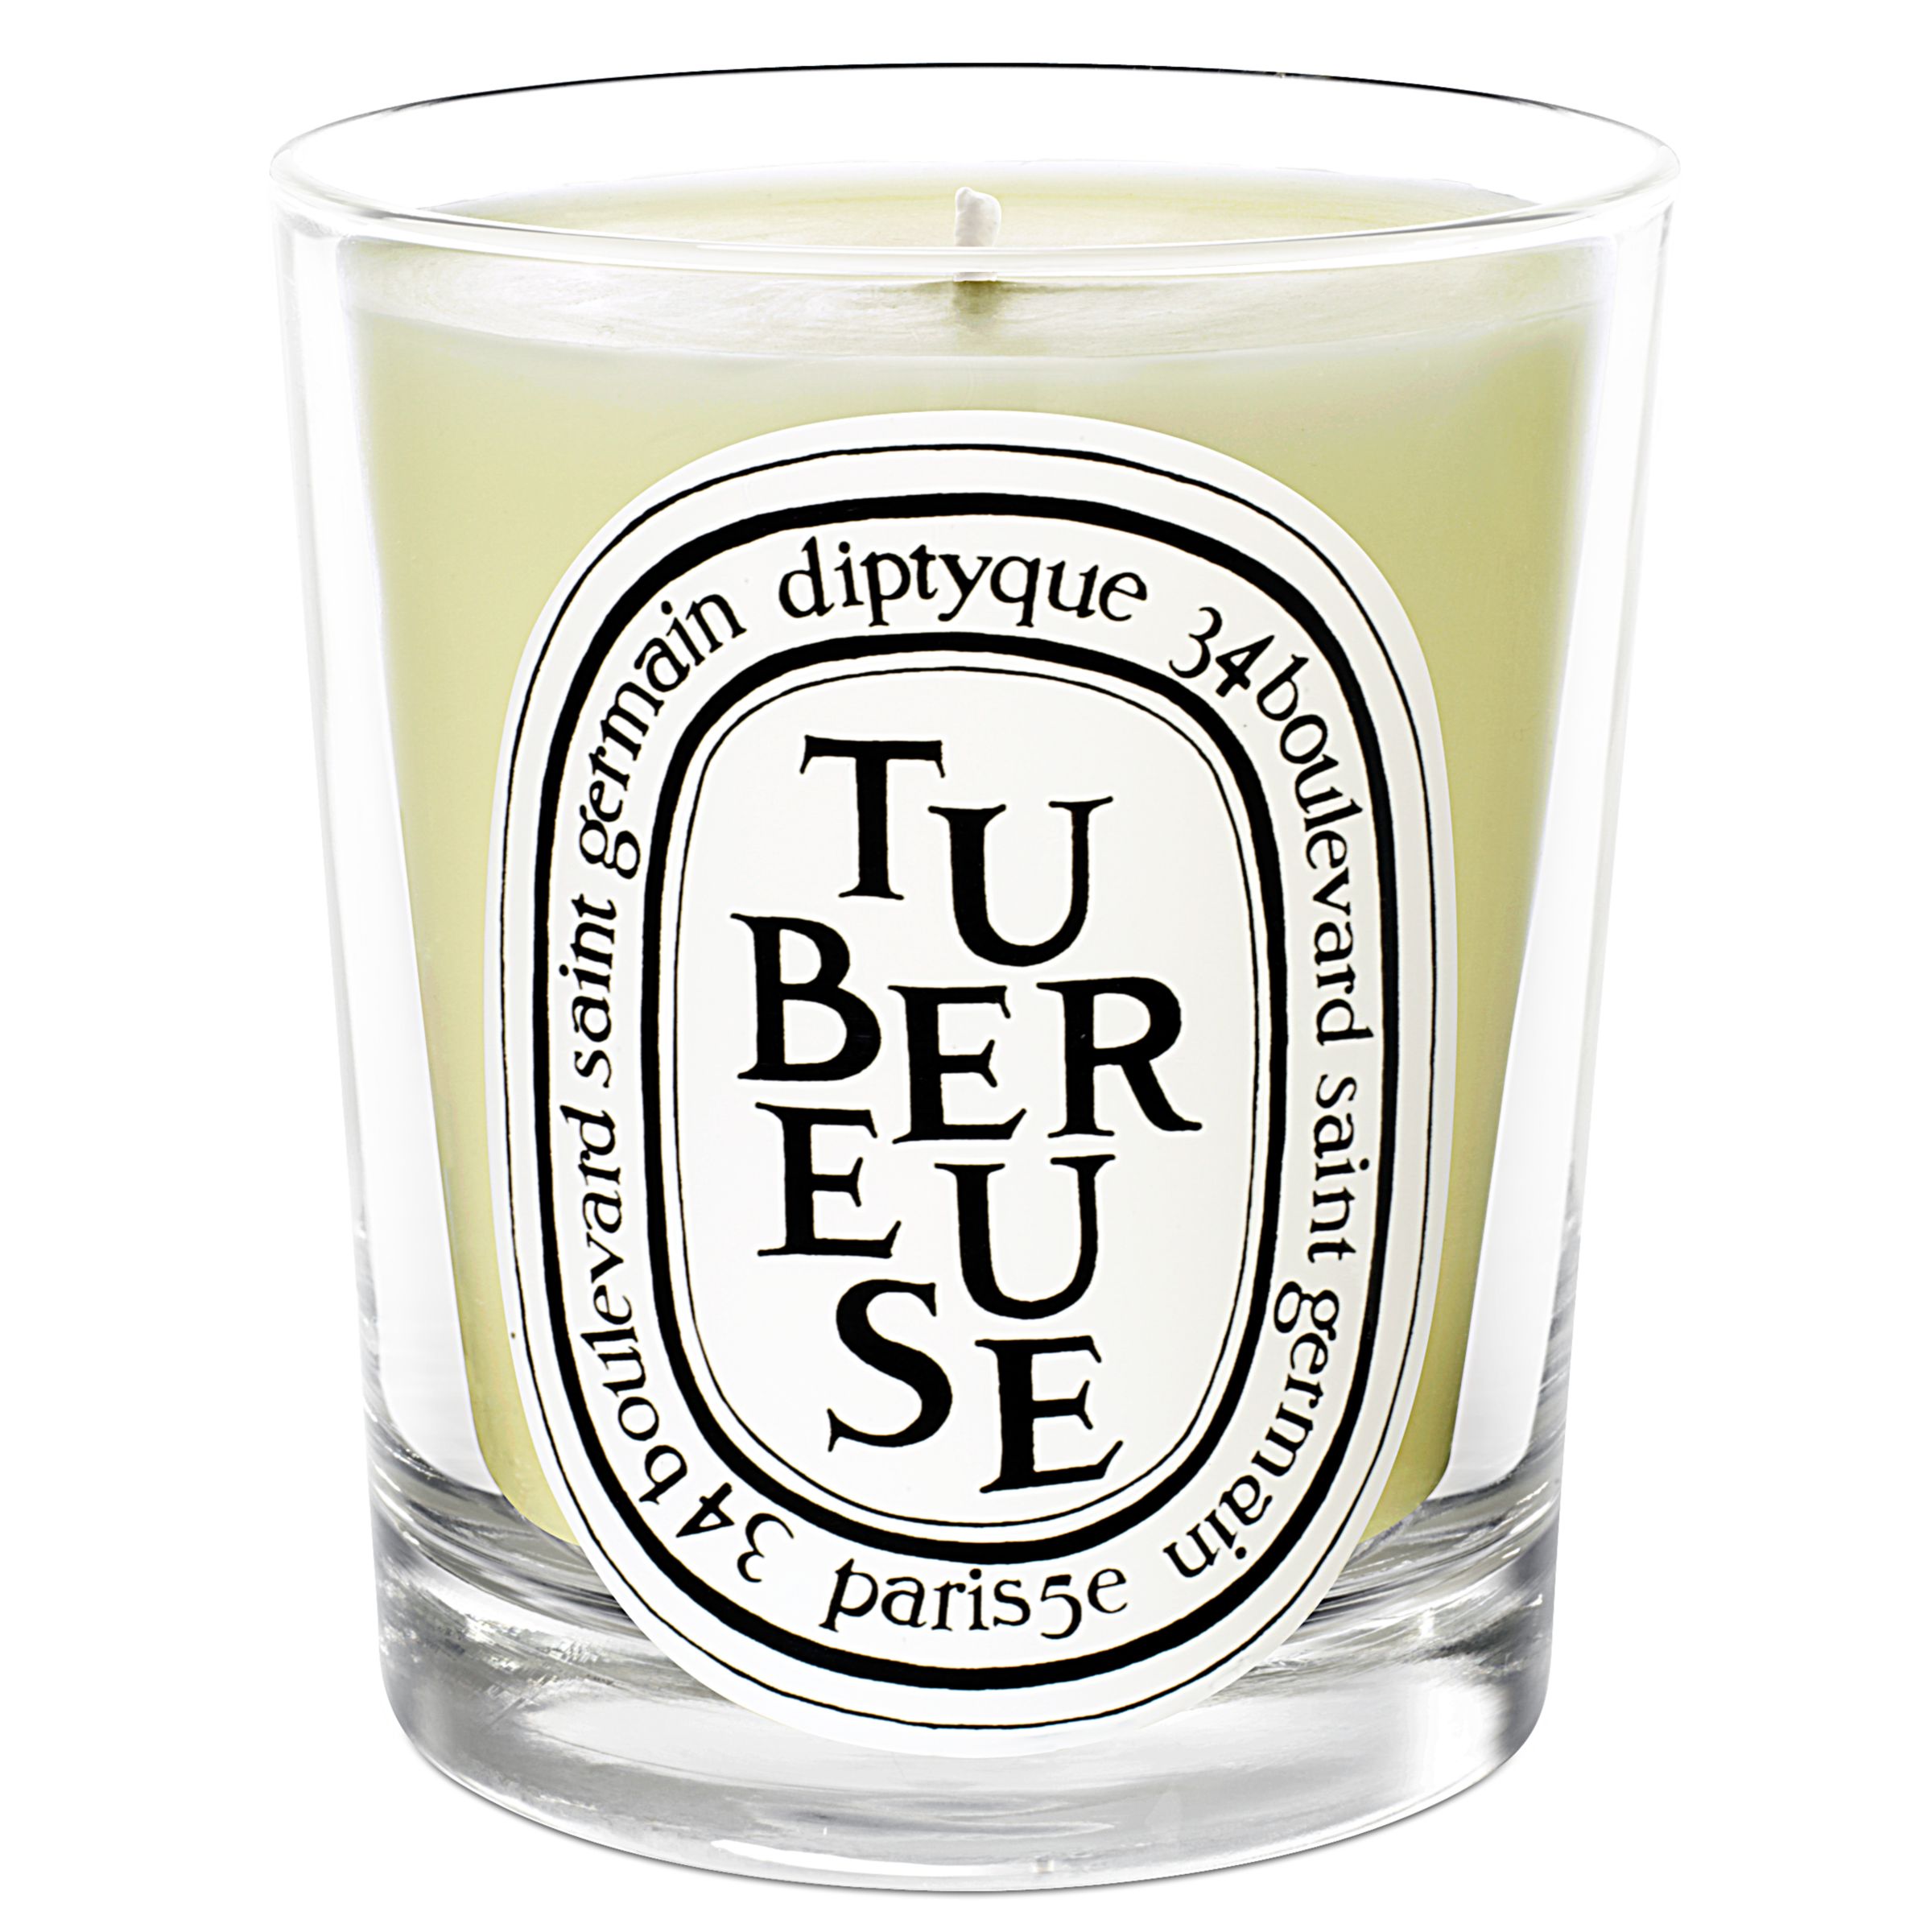 Diptyque Tubereuse Scented Candle, 190g